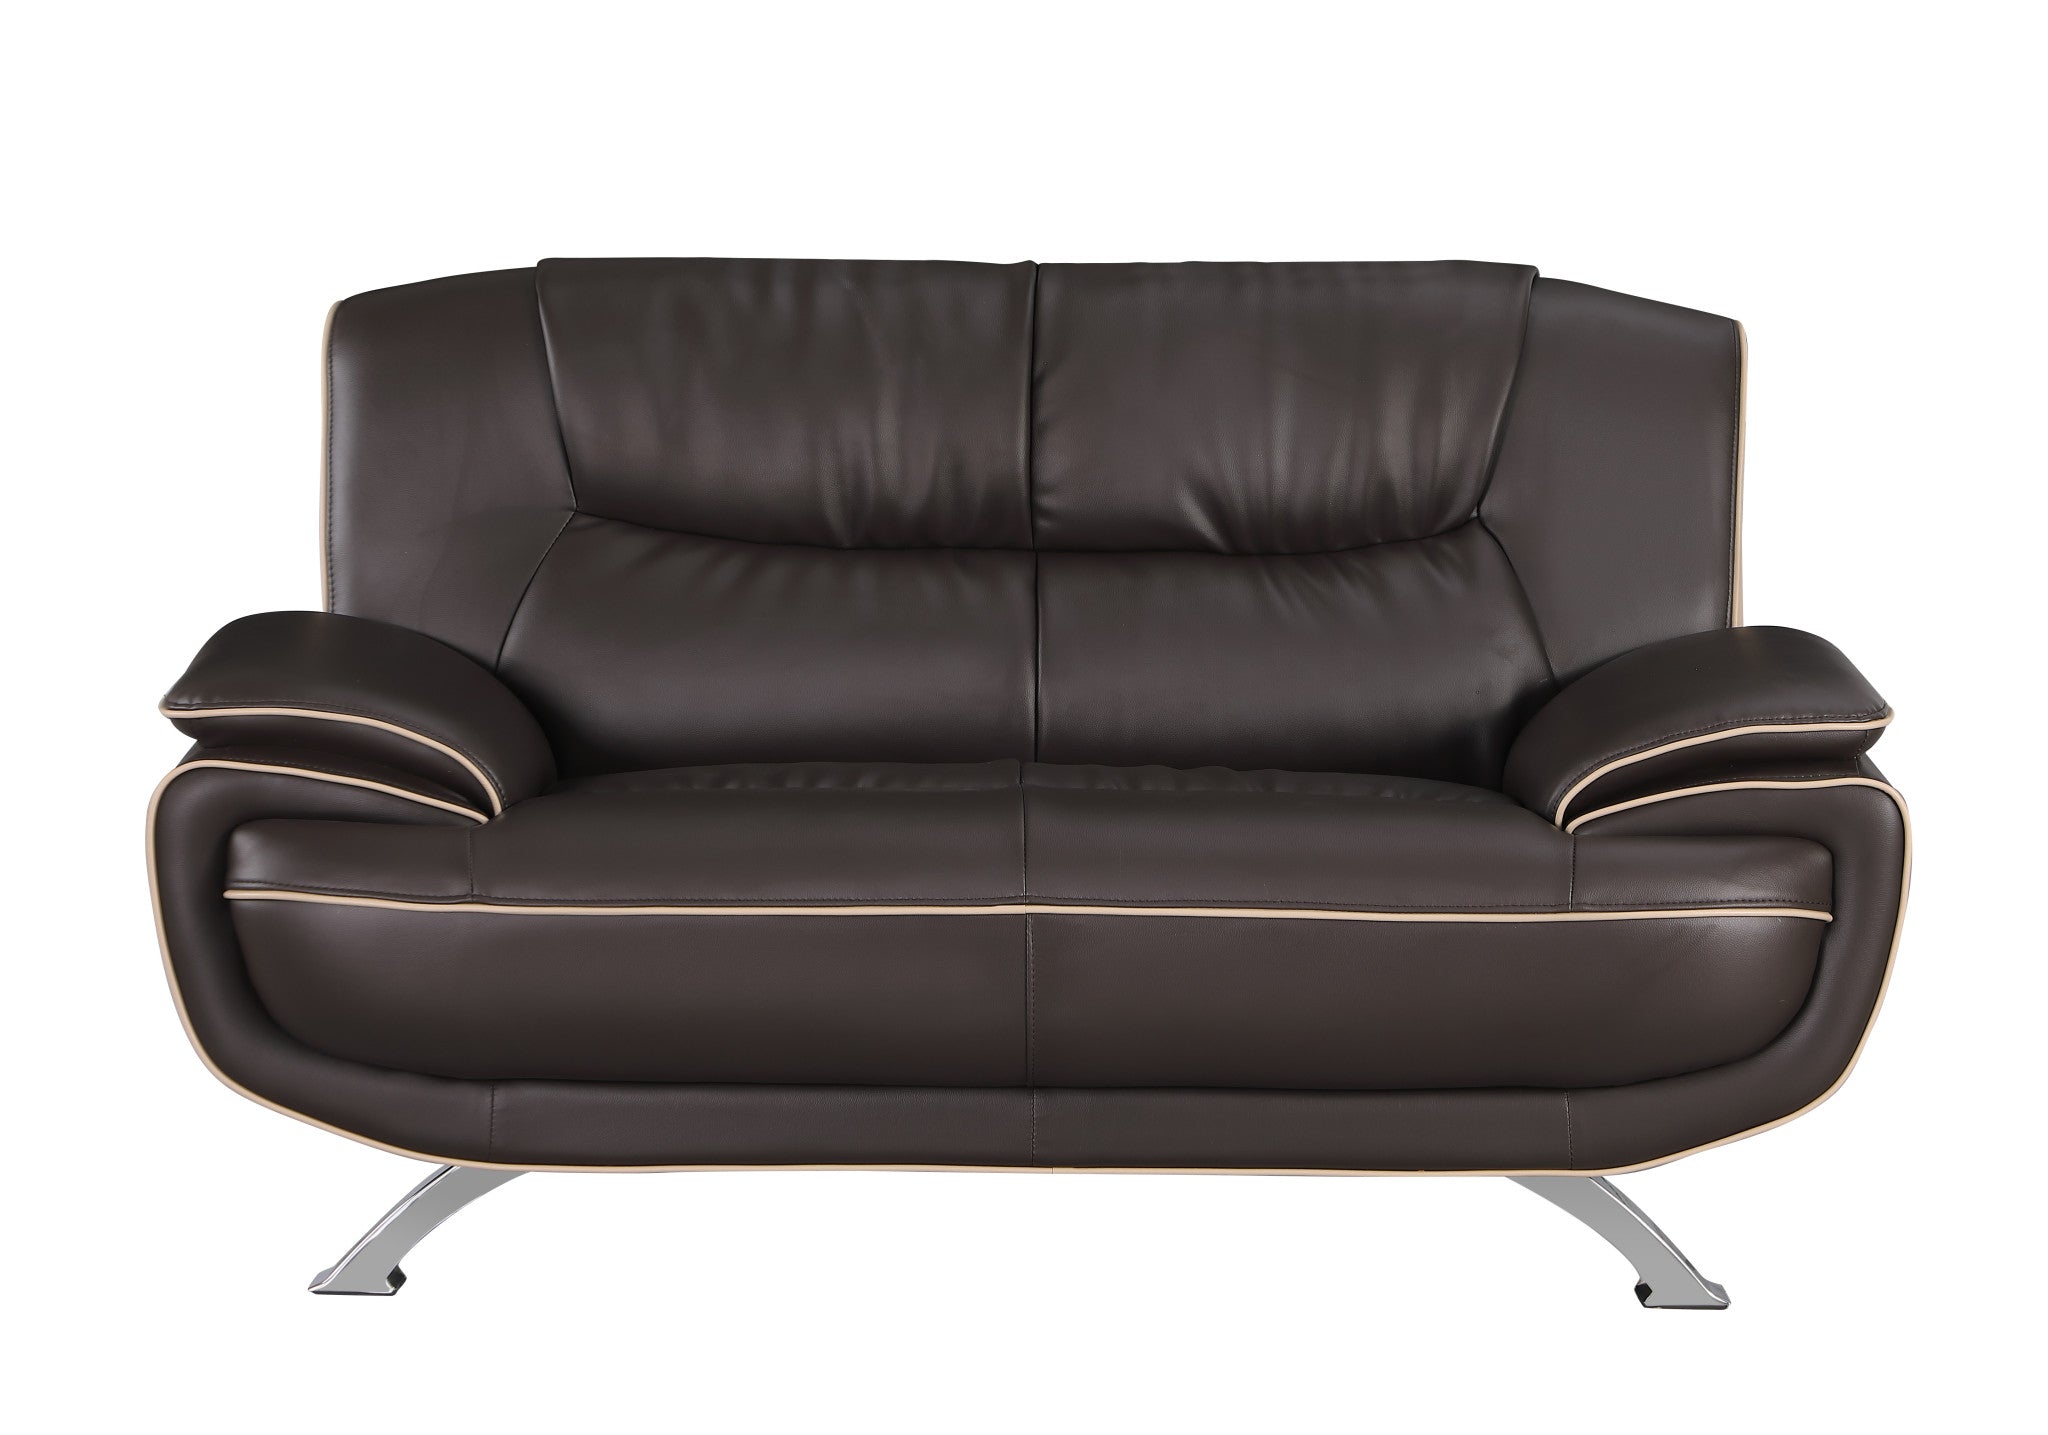 64" Brown And Silver Faux Leather Love Seat